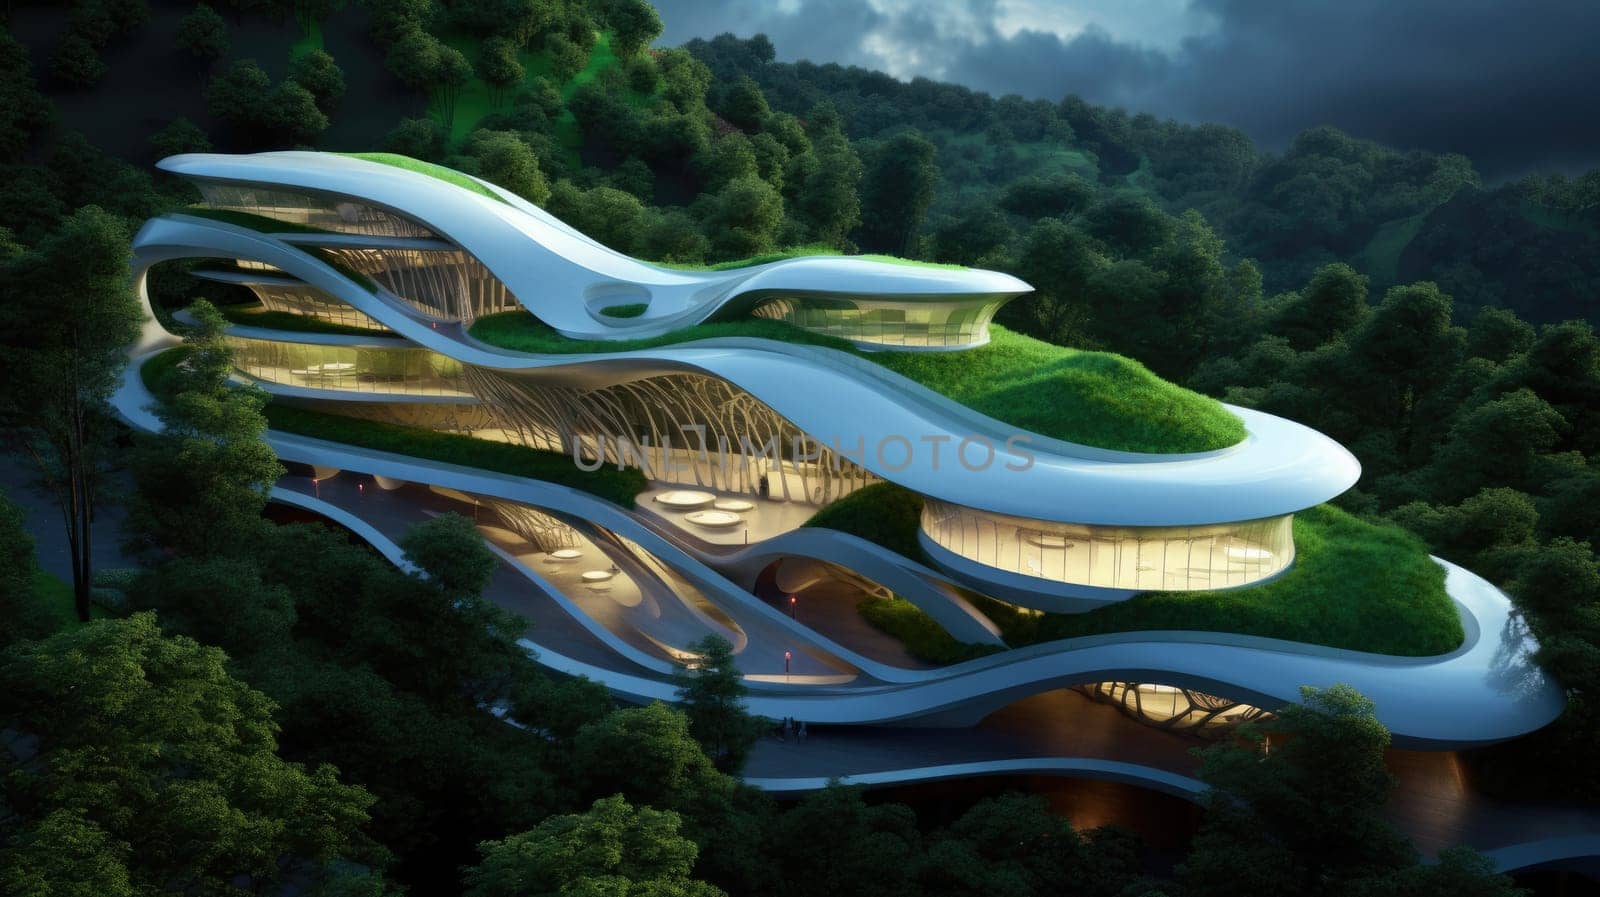 Futuristic sustainable complex office building for green economy and sustainability comeliness